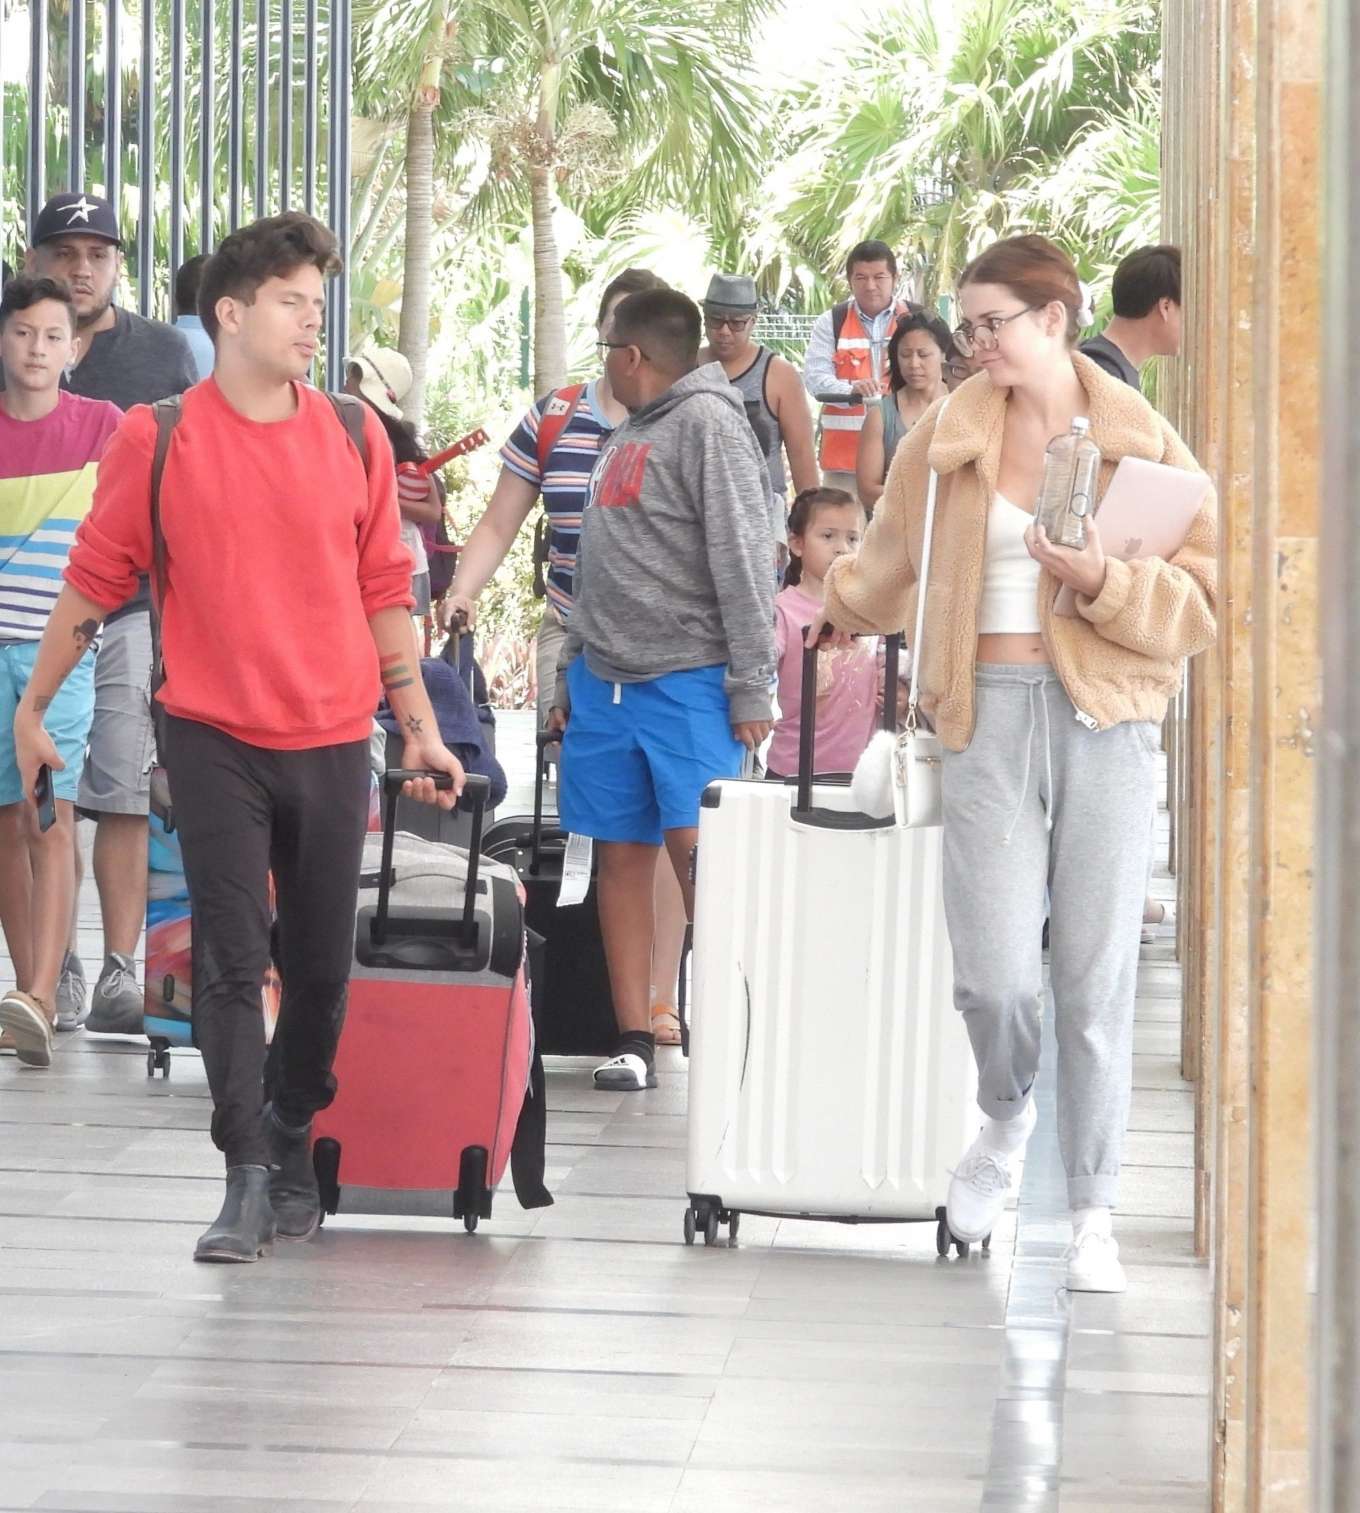 Maia Mitchell â€“ Arrives at Cancun airport in Tulum